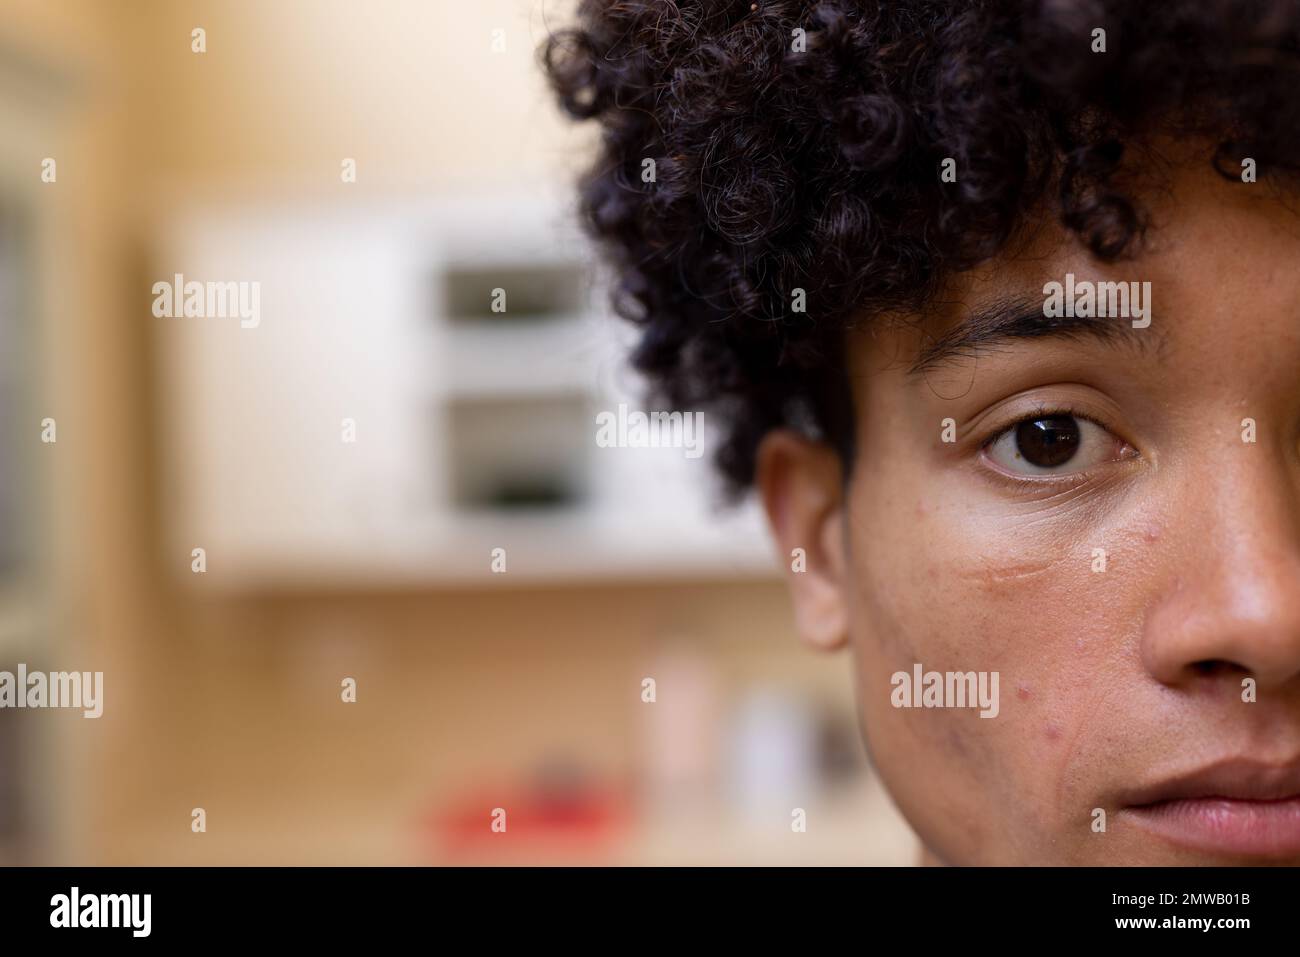 Half face portrait of thoughtful biracial man with curly hair in kitchen at home, copy space Stock Photo